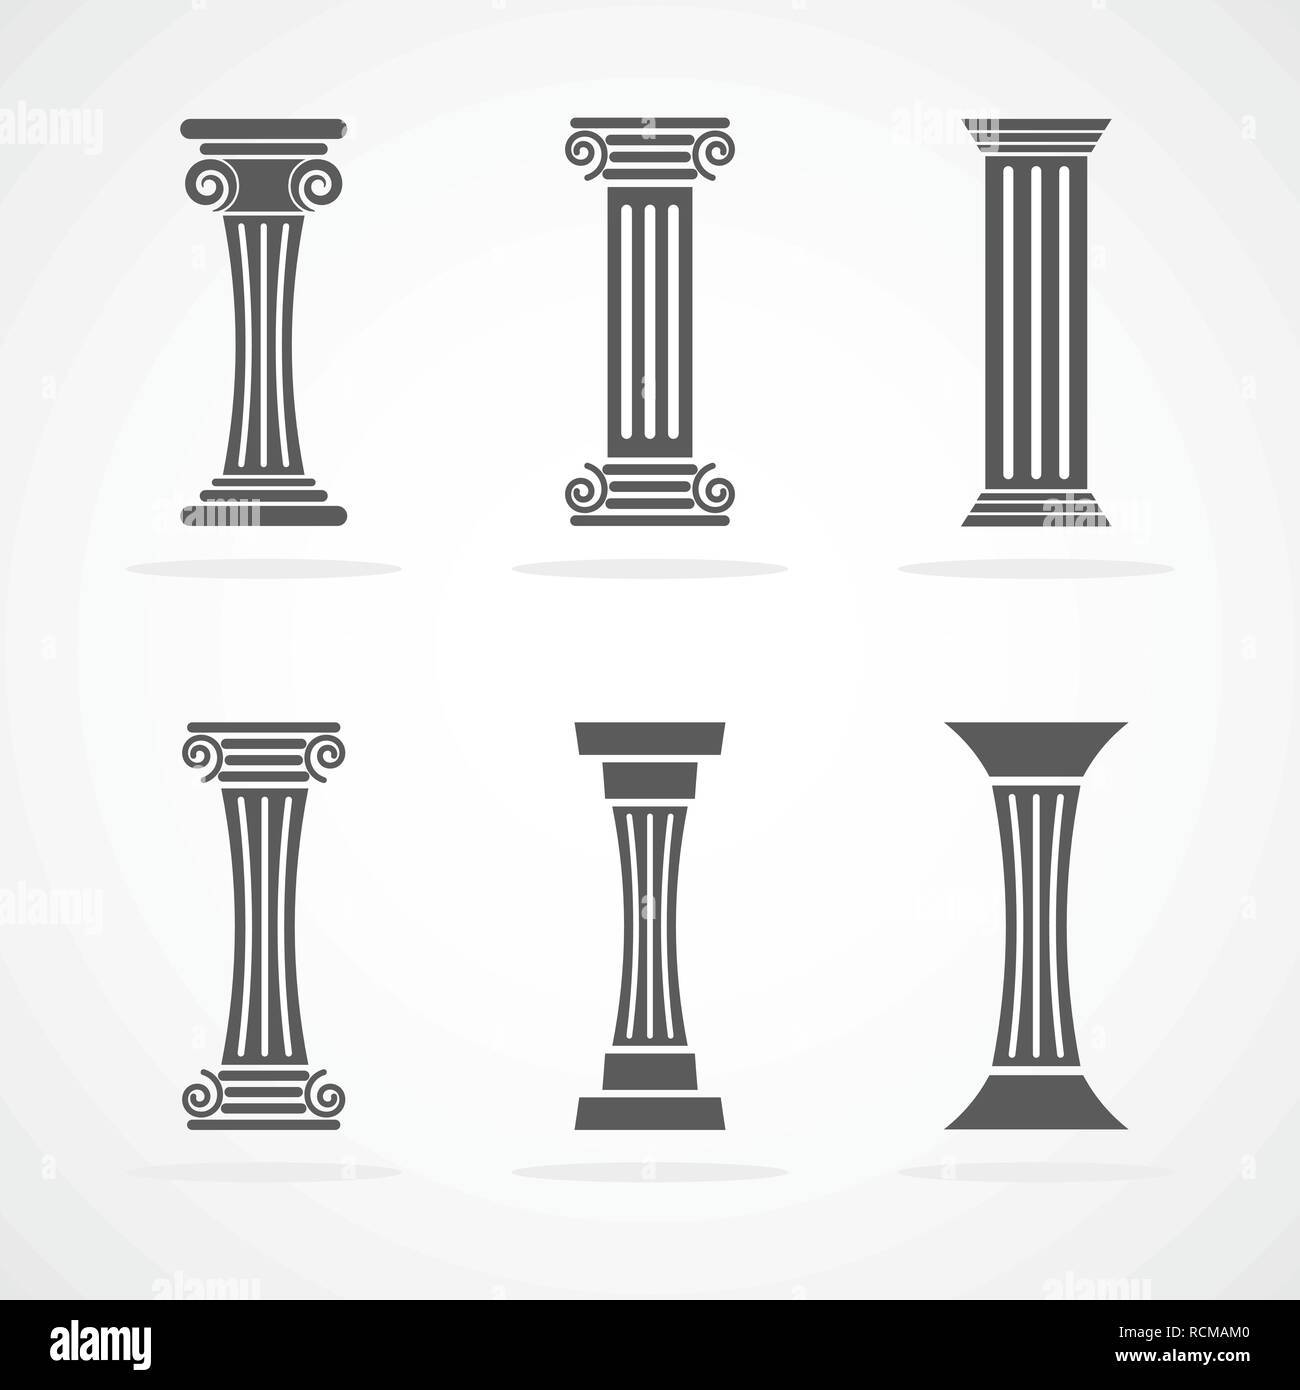 Antique column icons in flat design. Vector illustration. Gray roman column icons, isolated on light background Stock Vector